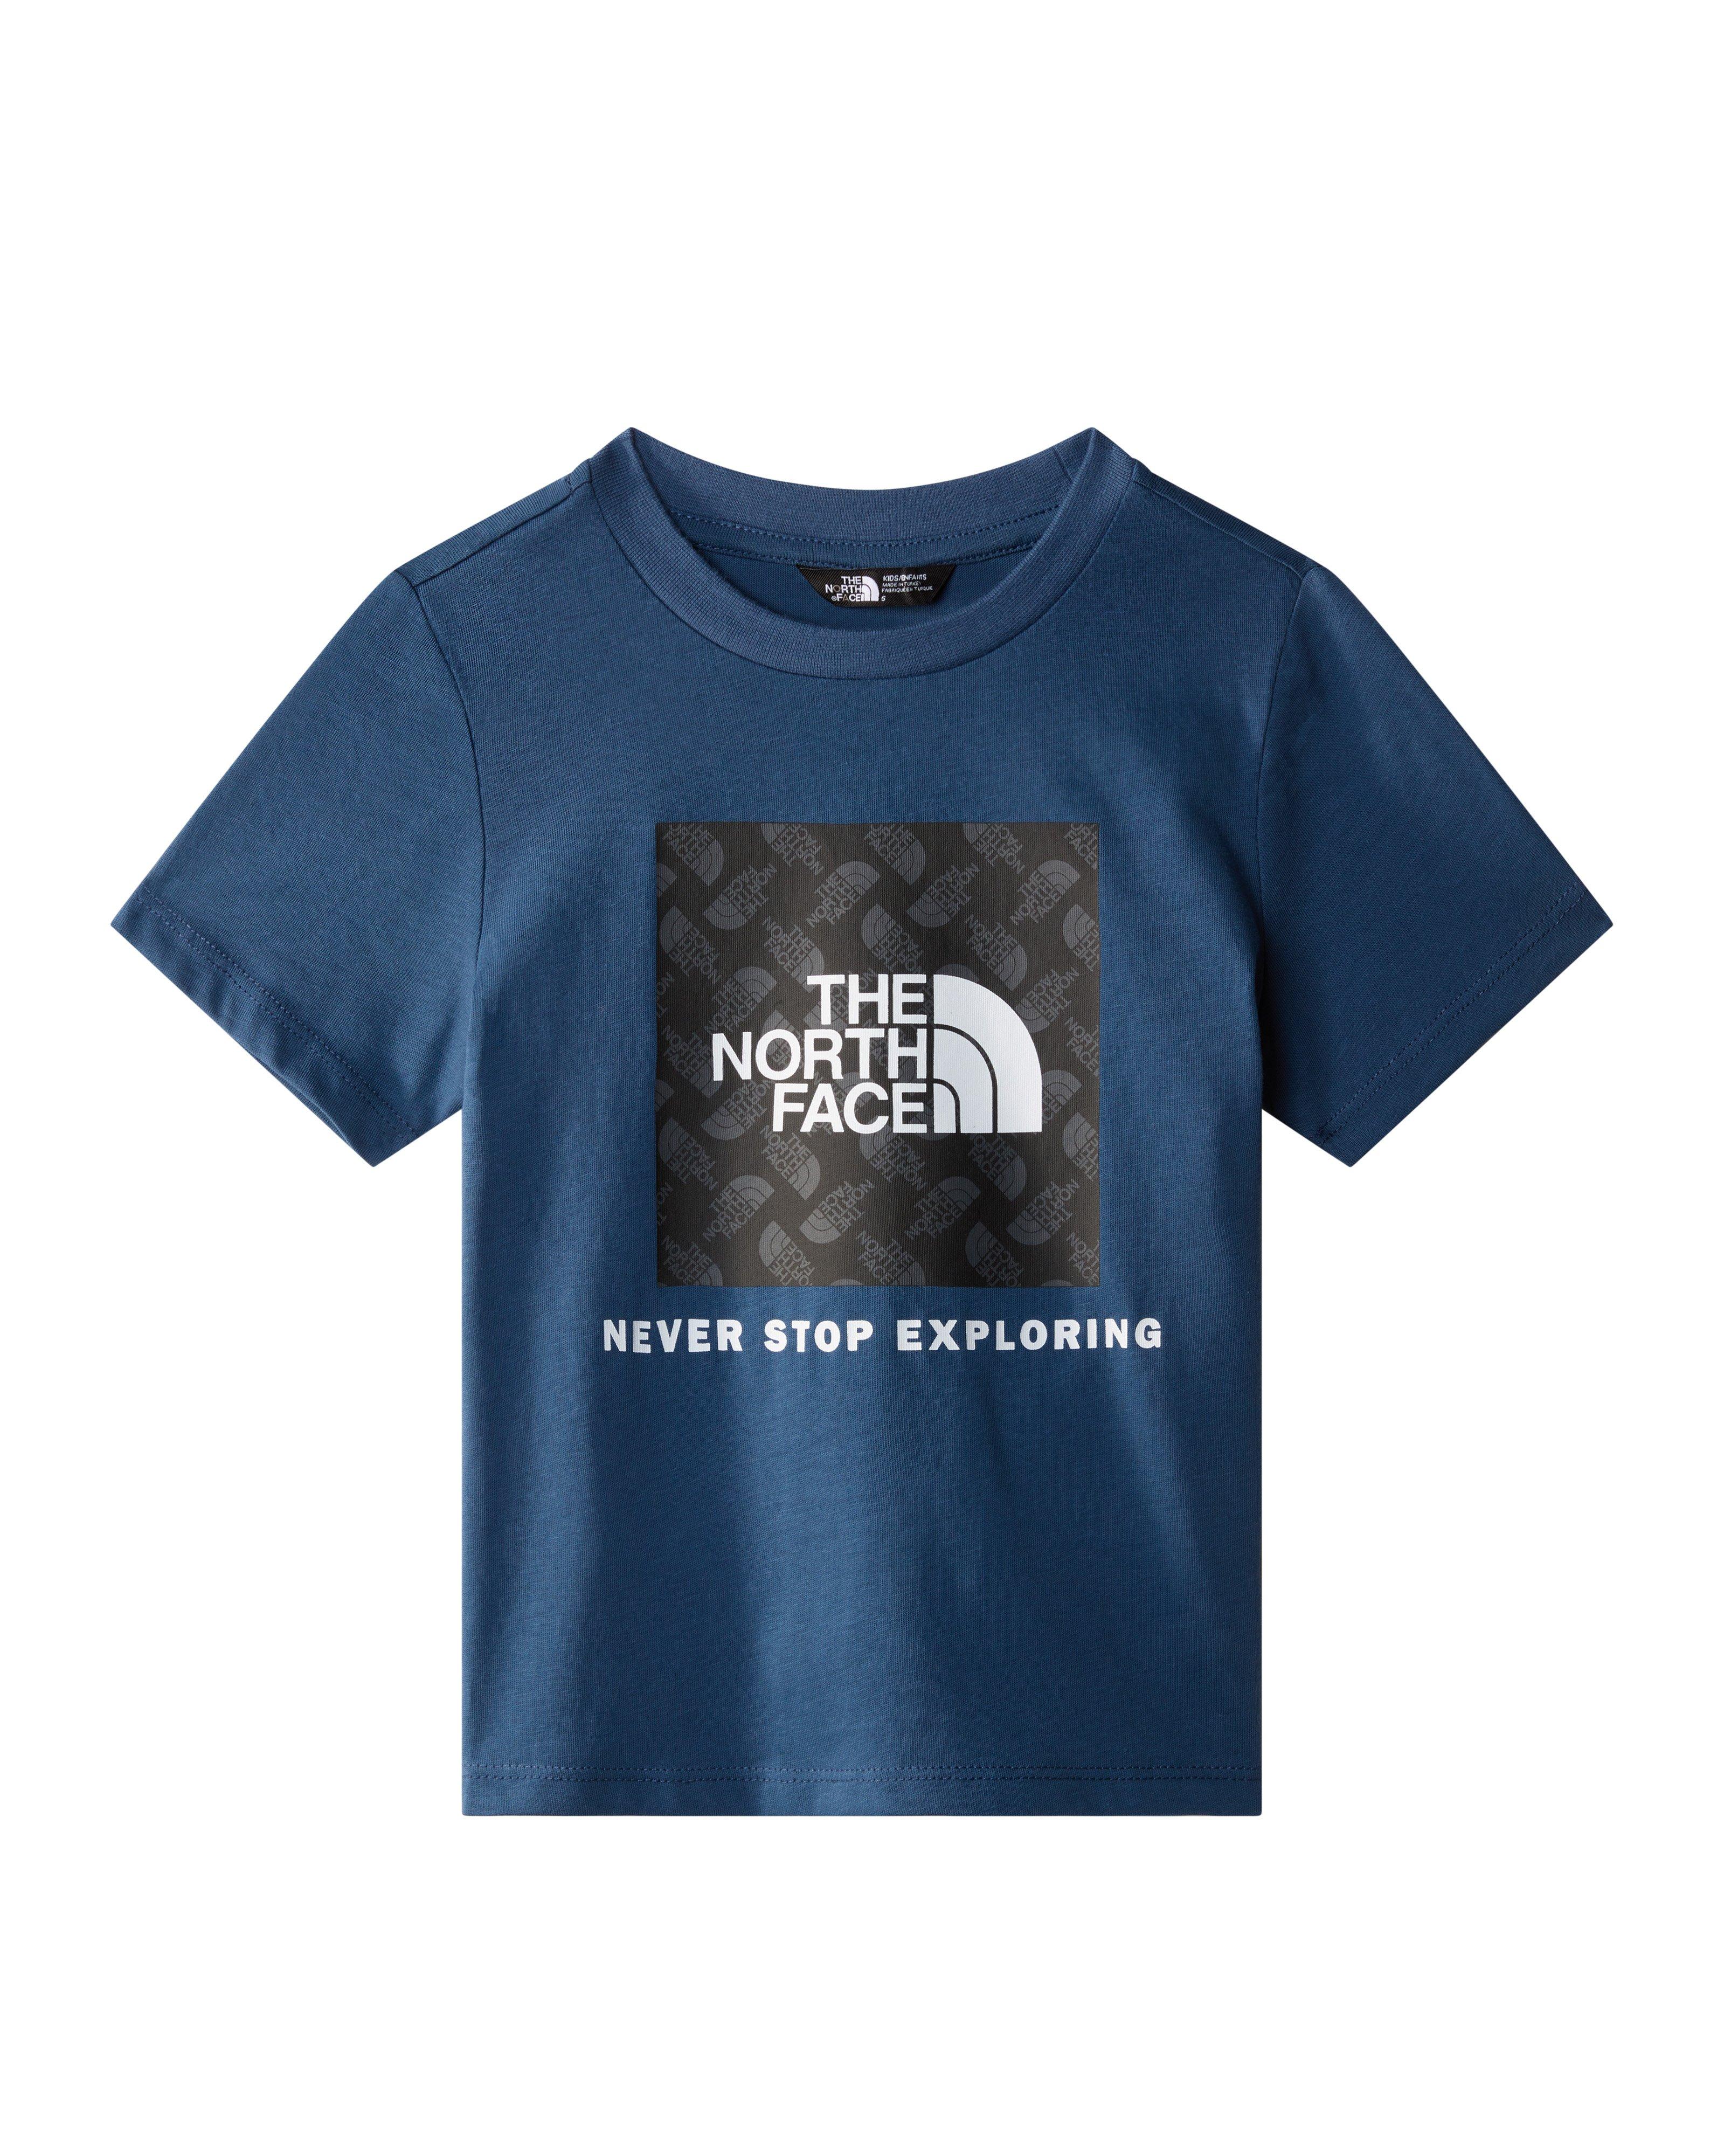 The North Face Kids Lifestyle Graphic T-shirt -  Mid Blue